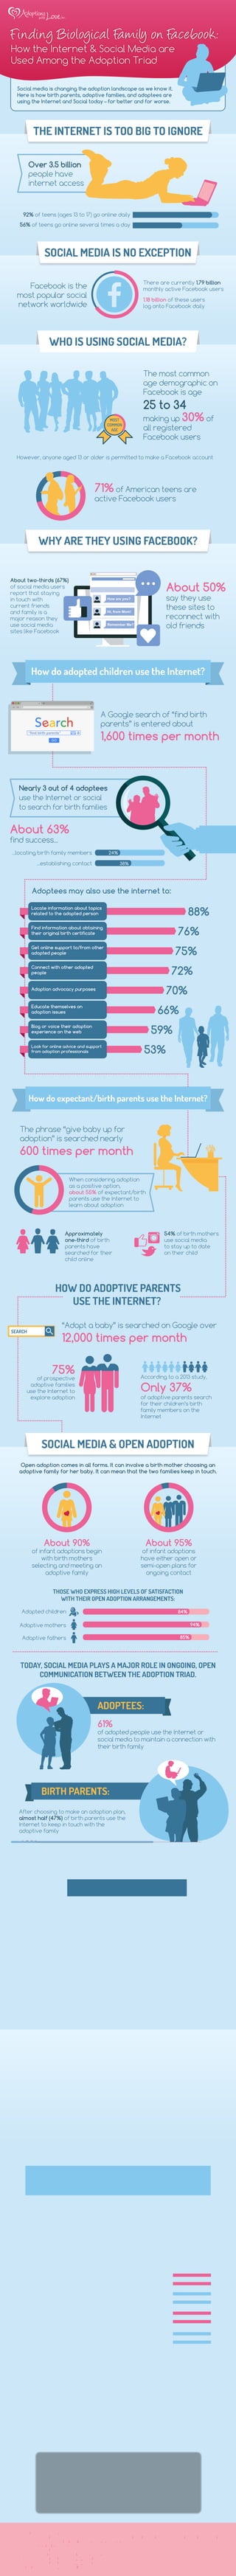 Social media is changing the adoption landscape as we know it.
Here is how birth parents, adoptive families, and adoptees are
using the Internet and Social today – for better and for worse.
Over 3.5 billion
people have
internet access
Finding Biological Family on Facebook:
How the Internet & Social Media are
Used Among the Adoption Triad
92% of teens (ages 13 to 17) go online daily
56% of teens go online several times a day
THE INTERNET IS TOO BIG TO IGNORE
SOCIAL MEDIA IS NO EXCEPTION
Facebook is the
most popular social
network worldwide
There are currently 1.79 billion
monthly active Facebook users
1.18 billion of these users
log onto Facebook daily
WHO IS USING SOCIAL MEDIA?
The most common
age demographic on
Facebook is age
25 to 34
However, anyone aged 13 or older is permitted to make a Facebook account
making up 30% of
all registered
Facebook users
71% of American teens are
active Facebook users
MOST
COMMON
AGE
WHY ARE THEY USING FACEBOOK?
Remember Me?
Hi, from Mom!
How are you?
About two-thirds (67%)
of social media users
report that staying
in touch with
current friends
and family is a
major reason they
use social media
sites like Facebook
About 50%
say they use
these sites to
reconnect with
old friends
How do adopted children use the Internet?
A Google search of “find birth
parents” is entered about
1,600 times per month
Nearly 3 out of 4 adoptees
use the Internet or social
to search for birth families
...locating birth family members
...establishing contact
About 63%
find success...
38%
24%
Adoptees may also use the internet to:
88%
Locate information about topics
related to the adopted person
76%
Find information about obtaining
their original birth certificate
75%
Get online support to/from other
adopted people
72%
Connect with other adopted
people
70%Adoption advocacy purposes
66%
Educate themselves on
adoption issues
59%
Blog or voice their adoption
experience on the web
53%
Look for online advice and support
from adoption professionals
How do expectant/birth parents use the Internet?
The phrase “give baby up for
adoption” is searched nearly
600 times per month
When considering adoption
as a positive option,
about 55% of expectant/birth
parents use the Internet to
learn about adoption
Approximately
one-third of birth
parents have
searched for their
child online
54% of birth mothers
use social media
to stay up to date
on their child
HOW DO ADOPTIVE PARENTS
USE THE INTERNET?
“Adopt a baby” is searched on Google over
12,000 times per month
SEARCH
“find birth parents”
75%
of prospective
adoptive families
use the Internet to
explore adoption
Only 37%
of adoptive parents search
for their children’s birth
family members on the
Internet
According to a 2013 study,
SOCIAL MEDIA & OPEN ADOPTION
About 95%
of infant adoptions
have either open or
semi-open plans for
ongoing contact
Open adoption comes in all forms. It can involve a birth mother choosing an
adoptive family for her baby. It can mean that the two families keep in touch.
About 90%
of infant adoptions begin
with birth mothers
selecting and meeting an
adoptive family
Adopted children
94%
84%
Adoptive mothers
85%Adoptive fathers
THOSE WHO EXPRESS HIGH LEVELS OF SATISFACTION
WITH THEIR OPEN ADOPTION ARRANGEMENTS:
TODAY, SOCIAL MEDIA PLAYS A MAJOR ROLE IN ONGOING, OPEN
COMMUNICATION BETWEEN THE ADOPTION TRIAD.
61%
of adopted people use the Internet or
social media to maintain a connection with
their birth family
BIRTH PARENTS:
ADOPTEES:
42%
use it to maintain a connection with their children
After choosing to make an adoption plan,
almost half (47%) of birth parents use the
Internet to keep in touch with the
adoptive family
32%
of adoptive parents use the Internet or
social for online contact with their child’s
birth family
ADOPTIVE PARENTS:
THE MOST COMMON USES OF THE INTERNET
BY ADOPTIVE PARENTS IN AN OPEN PLAN ARE:
Sharing pictures and updates
41%
84%
Arranging visits
22%Communicating health information
17%Answering child’s questions
It is important to remember that the Internet and social media also pose potential
risks to the adoption triad. Because contact between families can take place more
quickly online, many adoptees, birth parents, and adoptive families do not have
the opportunity for self-reflection, conversation, or counseling beforehand.
ONLINE CONTACT IS TYPICALLY UNPLANNED.
63%
of adoption professionals
have heard from adoptive
families whose children
have had unexpected or
unmonitored contact with
birth relatives
About 11%
of birth parents have been
contacted by their children
or the adoptive family
when it was not planned
or expected
Establishing Rules & Expectations
for Ongoing Contact
If you are in an open or semi-open adoption arrangement, it is important to
establish rules for ongoing contact. These will help ensure that boundaries are
maintained and that everyone’s wishes are respected.
Establishing expectations in an open
adoption agreement can prevent
unplanned or unwanted contact. In a
survey of adopted persons who had
online contact with their birth families,
73%
of had not discussed rules or
expectations prior to online contact
51%
of their adoptive families had not
established rules about such
contact with the birth family
RULES
Counseling, guidance, and reﬂection are crucial prerequisites to the Search &
Reunion process. If you are considering an online search for your birth parents or
adopted child, we encourage you to give us a call. Searching online should not be
done without the help of a trained adoption professional. Adoptions With Love can
help you navigate any contact or searching that occurs online.
For more information about Adoptions With Love, please call us toll-free, 24/7 at
1-8OO-722-7731. You can also conﬁdentially text us at 1-617-777-OO72.
Sources:
http://www.internetlivestats.com/internet-users/
https://twitter.com/intent/tweet?url=http://pewrsr.ch/1E6RQLr&text=92% of American teens go online daily%2C including 24% who go online %27almost constantly.%27
https://www.statista.com/statistics/272014/global-social-networks-ranked-by-number-of-users/
https://zephoria.com/top-15-valuable-facebook-statistics/
https://twitter.com/intent/tweet?url=http://pewrsr.ch/1E6RQLr&text=71% of American teens use Facebook.
http://www.pewresearch.org/daily-number/using-social-media-to-keep-in-touch/
http://www.adoptioninstitute.org/old/publications/2013_12_UntanglingtheWeb2.pdf
http://www.adoptioninstitute.org/old/publications/2012_12_UntanglingtheWeb.pdf
https://www.childwelfare.gov/pubPDFs/f_openadoptbulletin.pdf
 